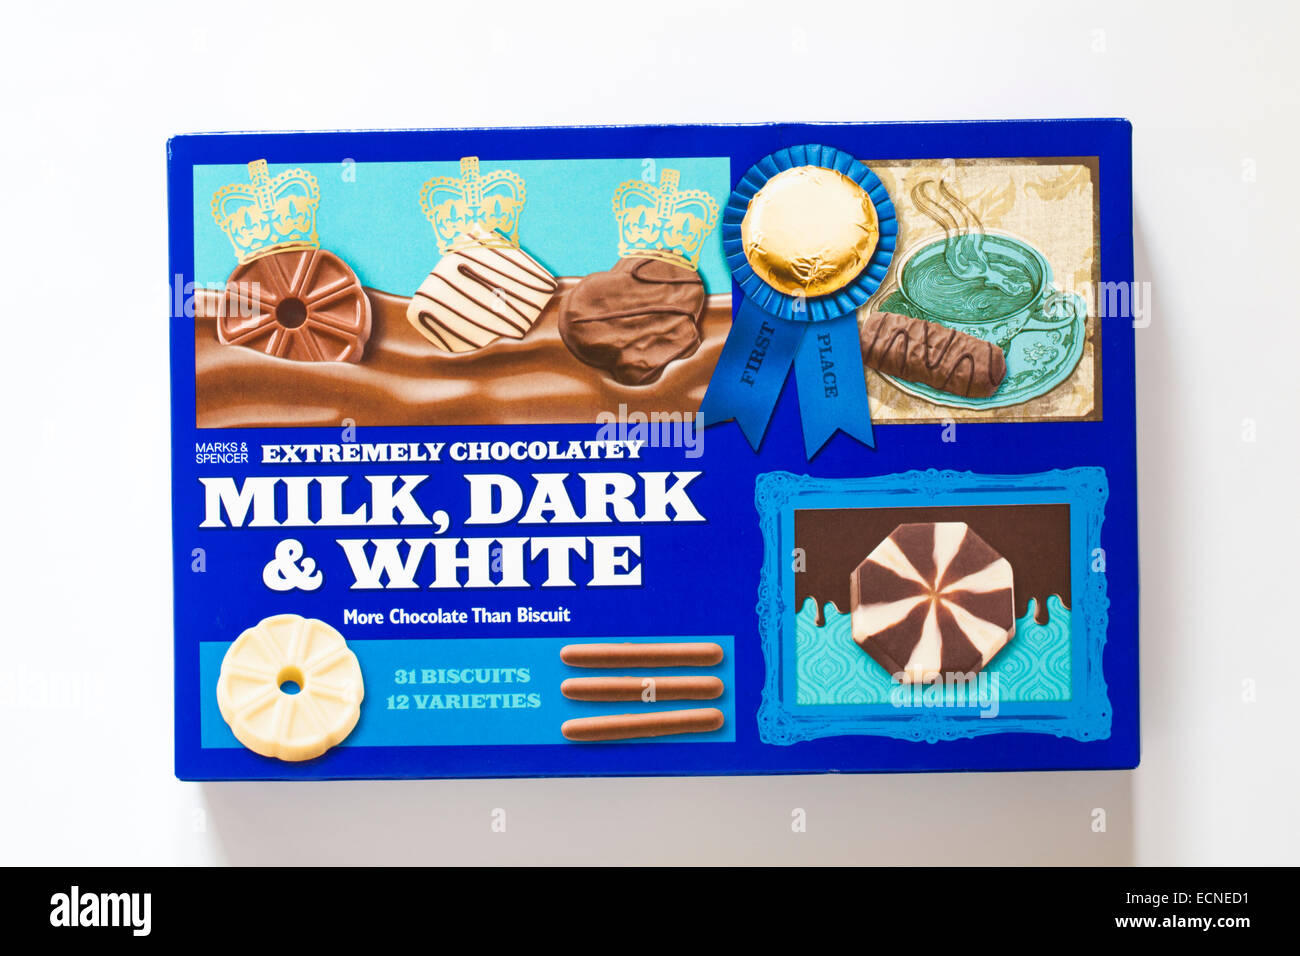 packet of Marks & Spencer Extremely chocolatey milk dark & white biscuits isolated on white background Stock Photo